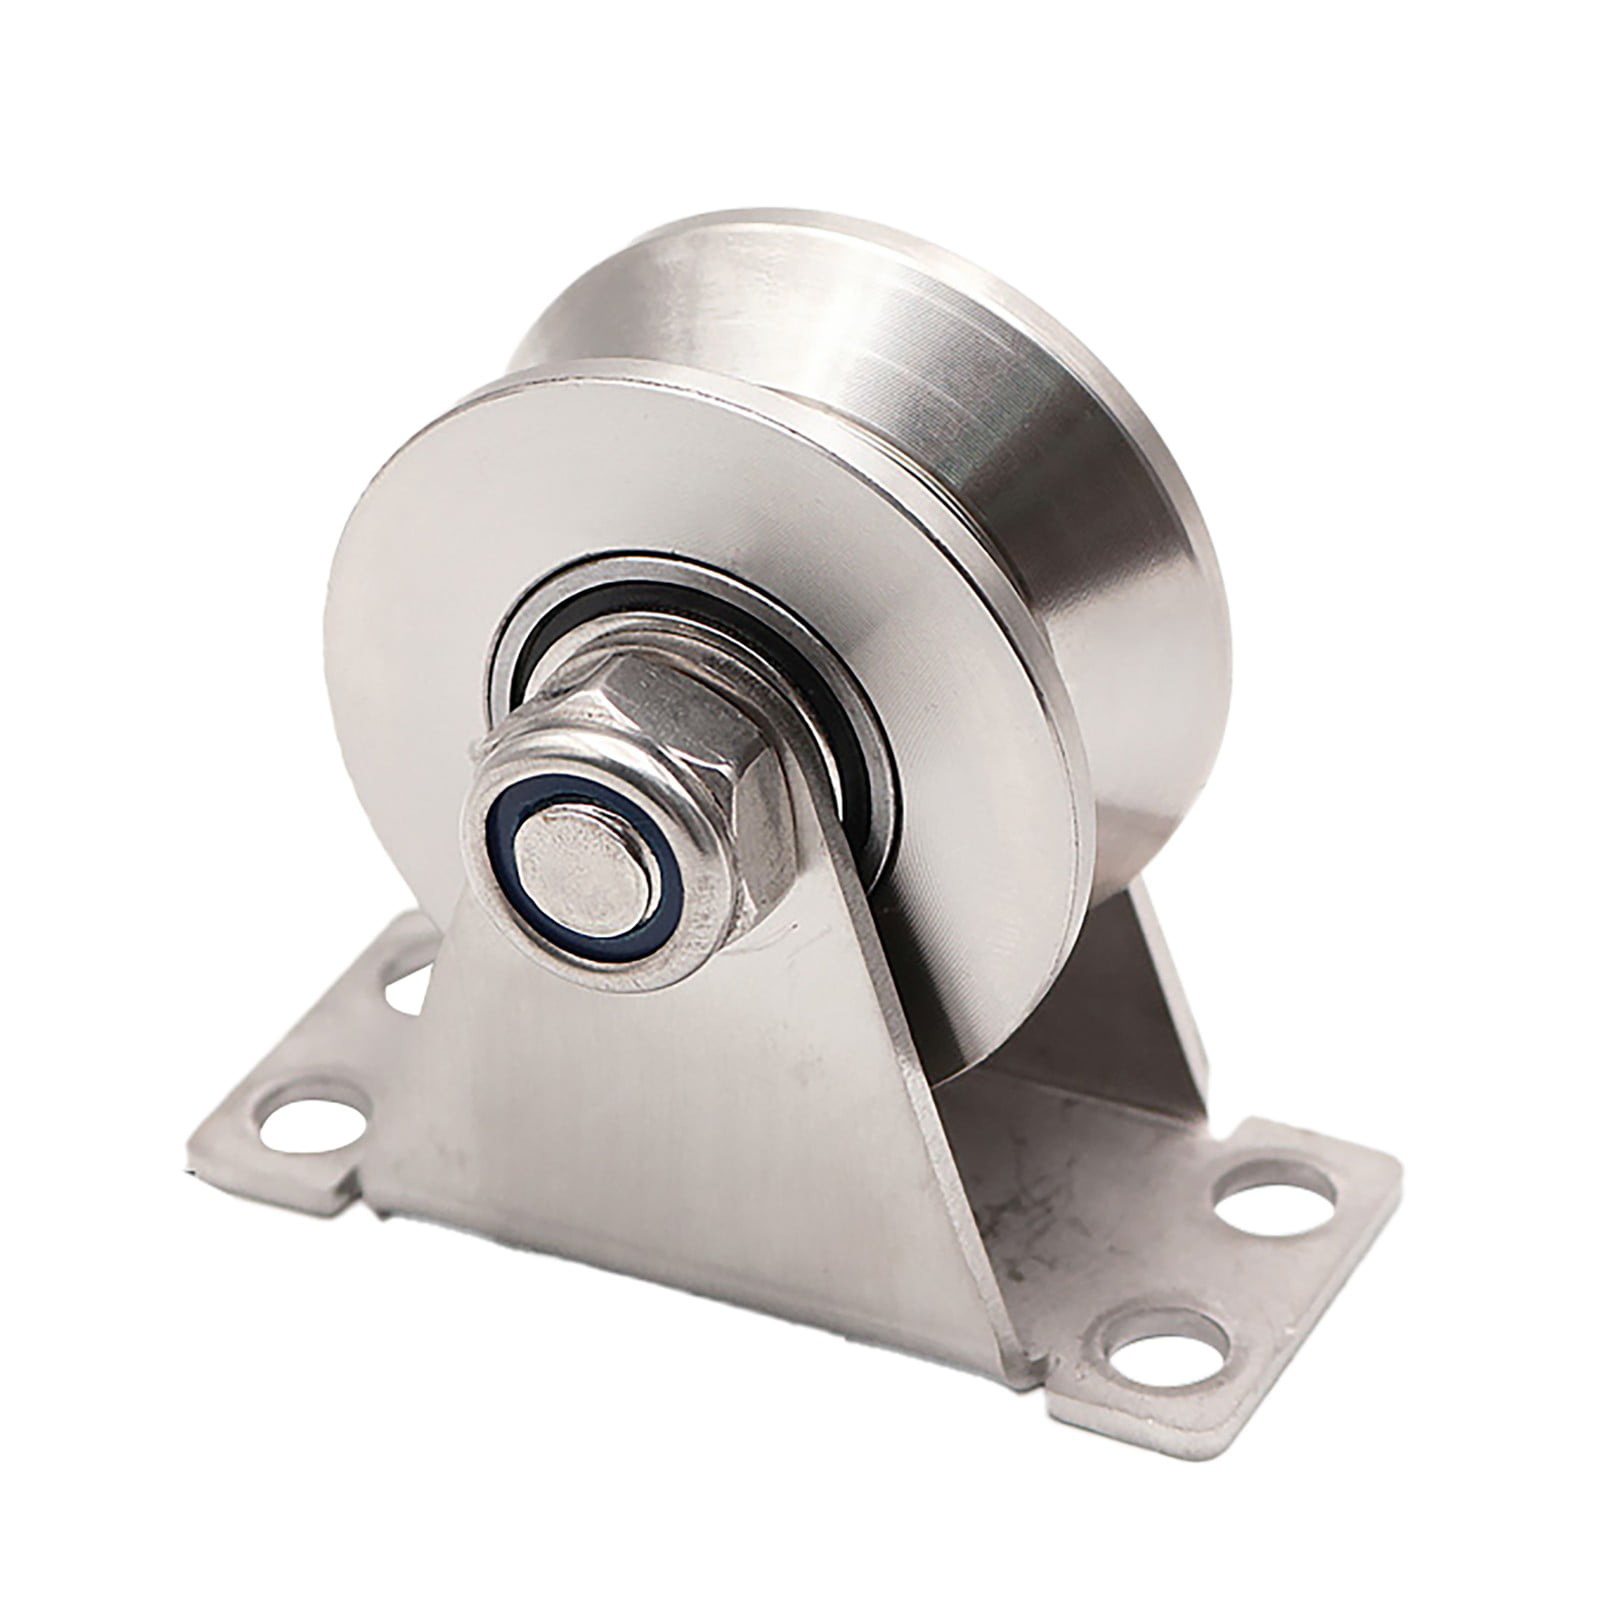 Stainless Steel Pulley Block Single Wheel Sliding Roller Track Wheel Pulley for Wire Rope Traction 